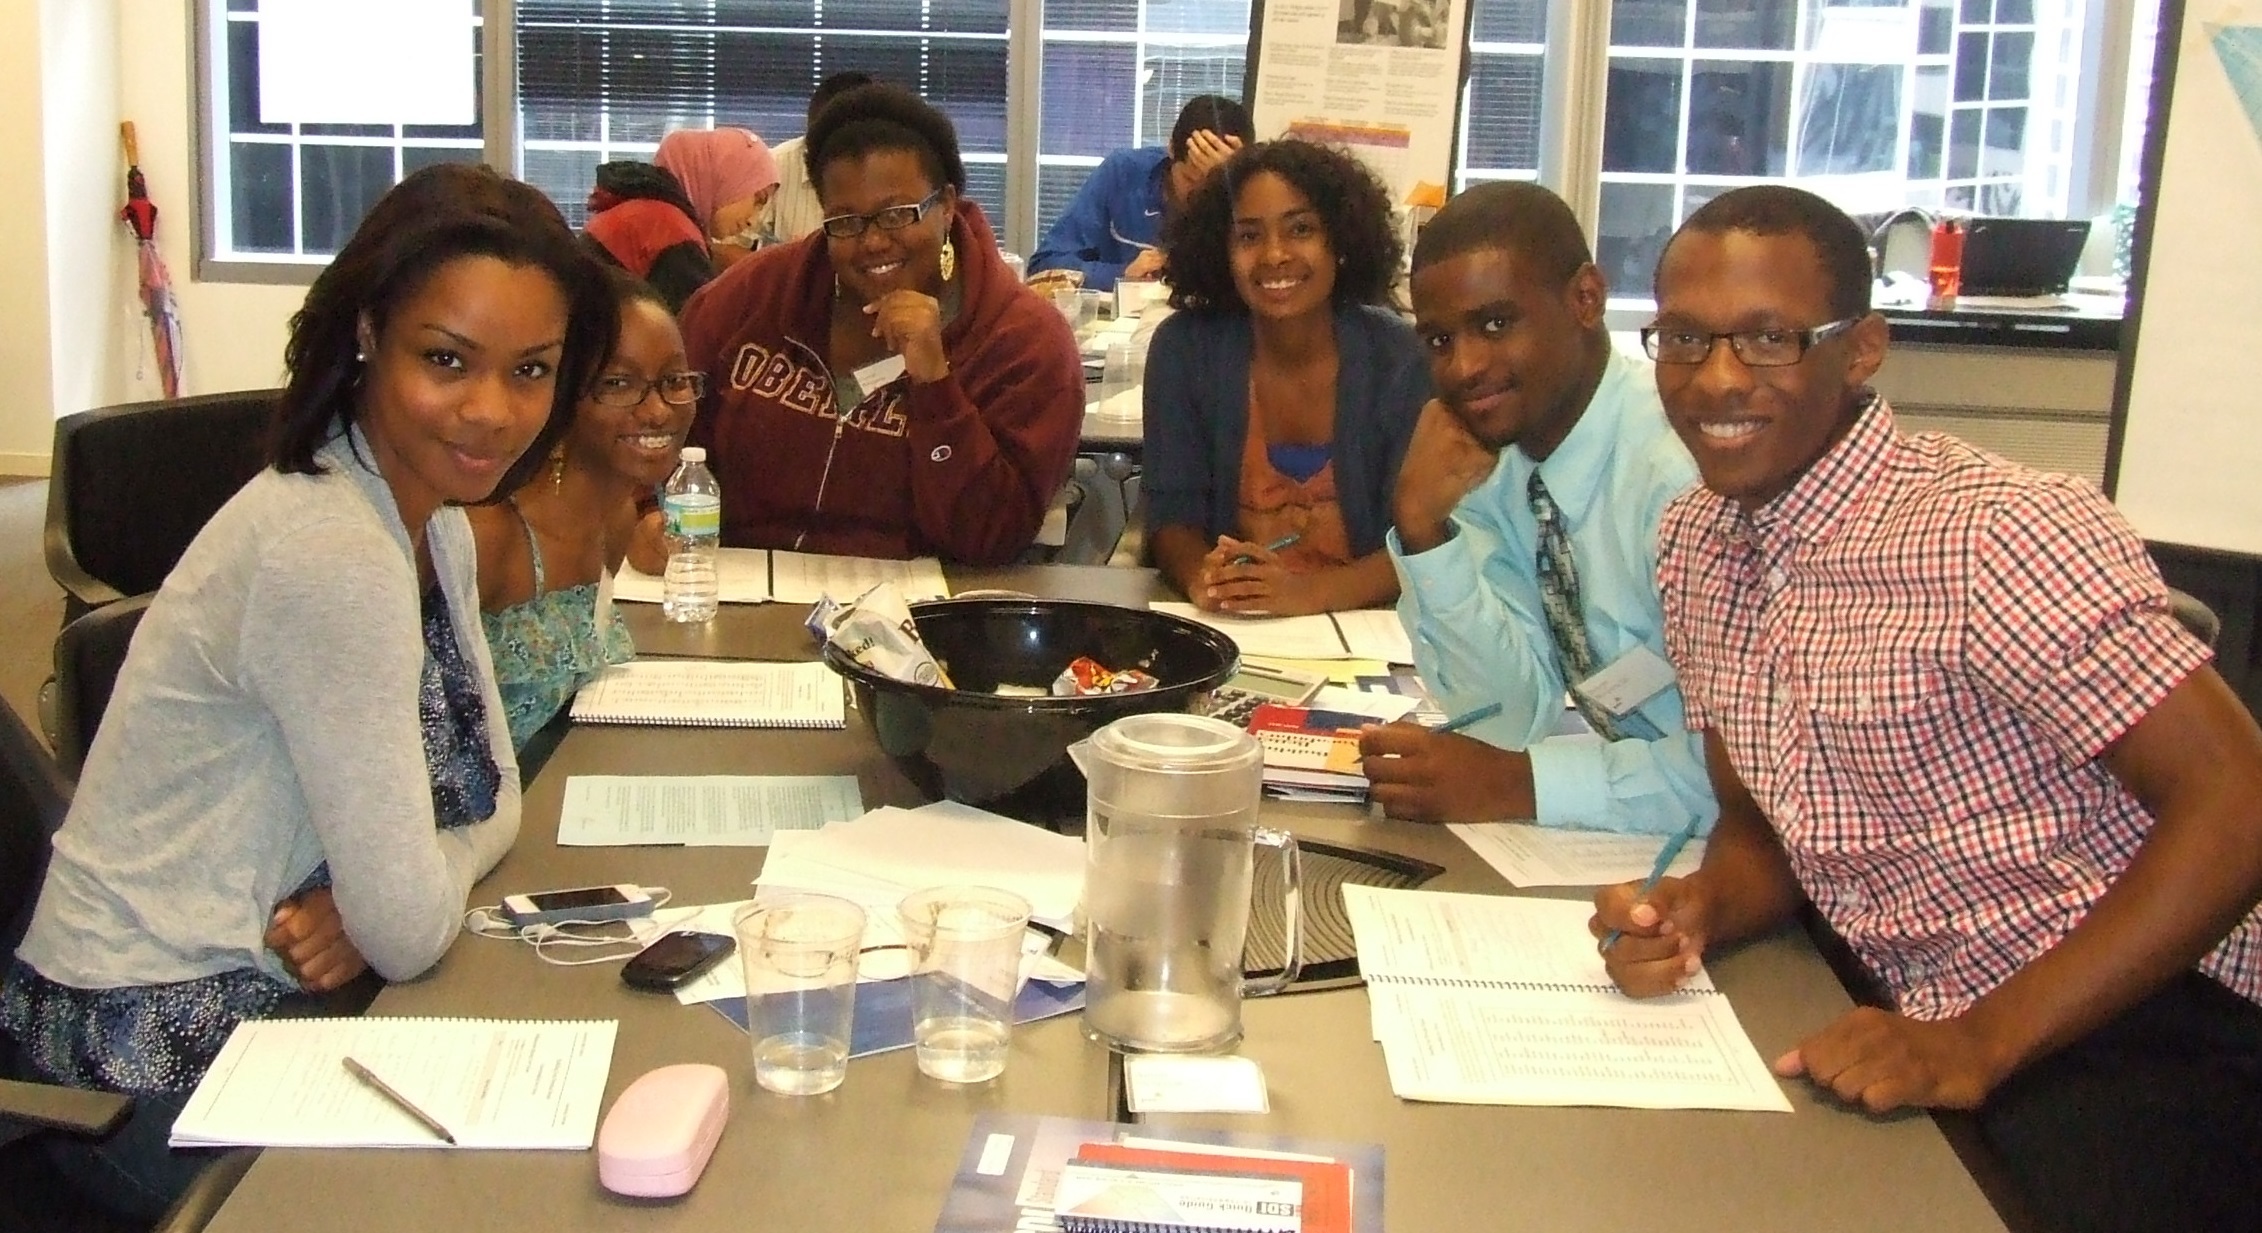 Forty Posse Scholars participated in PwC’s "Learn for the Future" initiative during the summer of 2012.